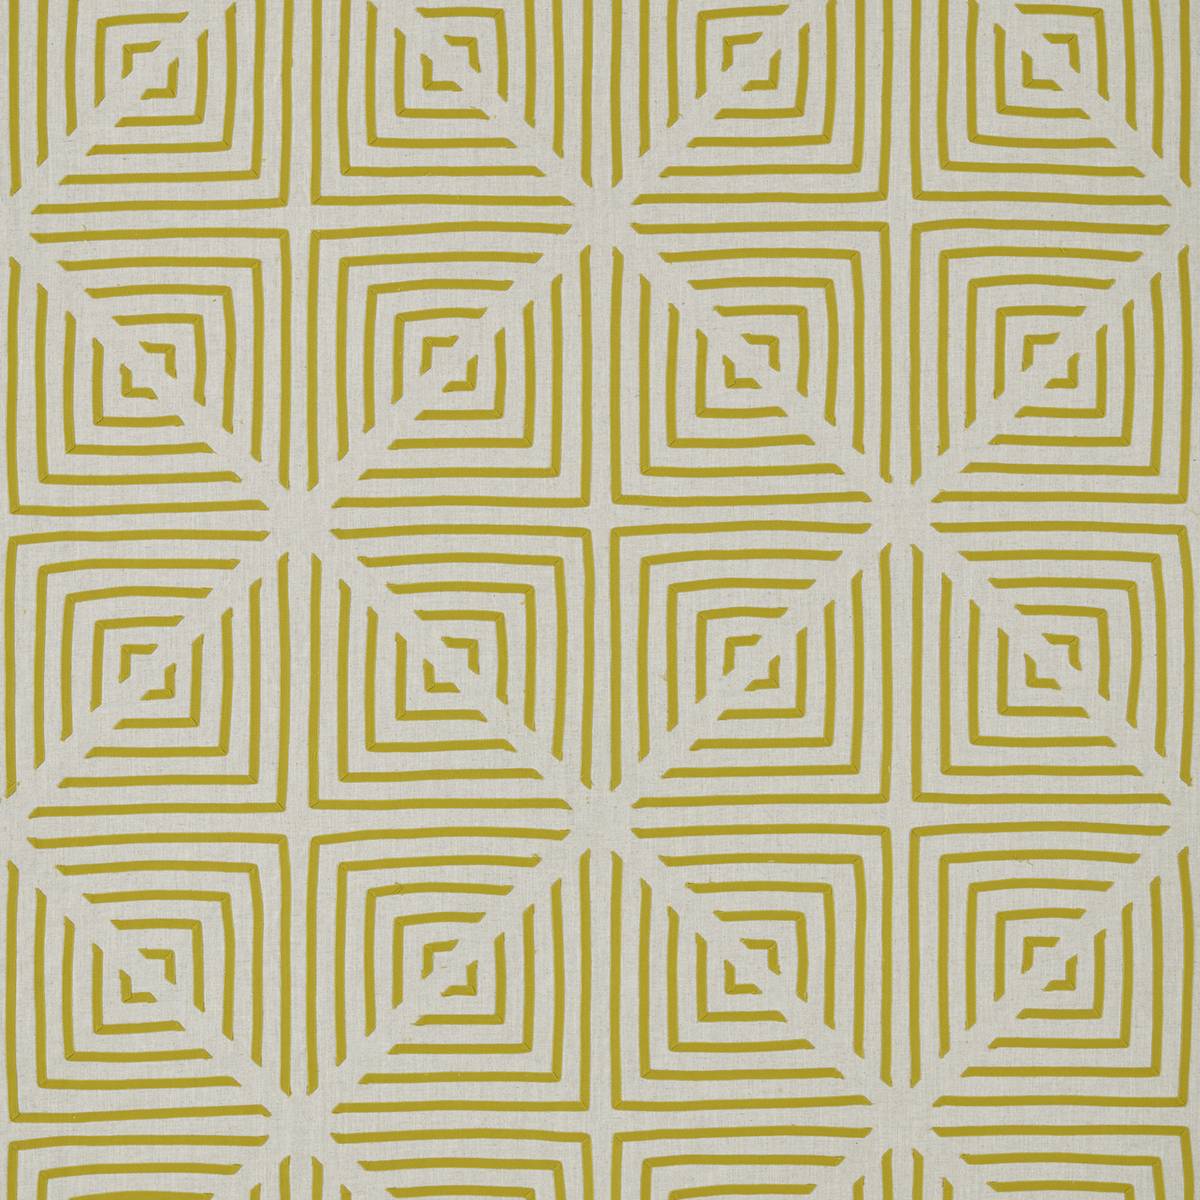 Radial Linen/Zest Fabric by Harlequin